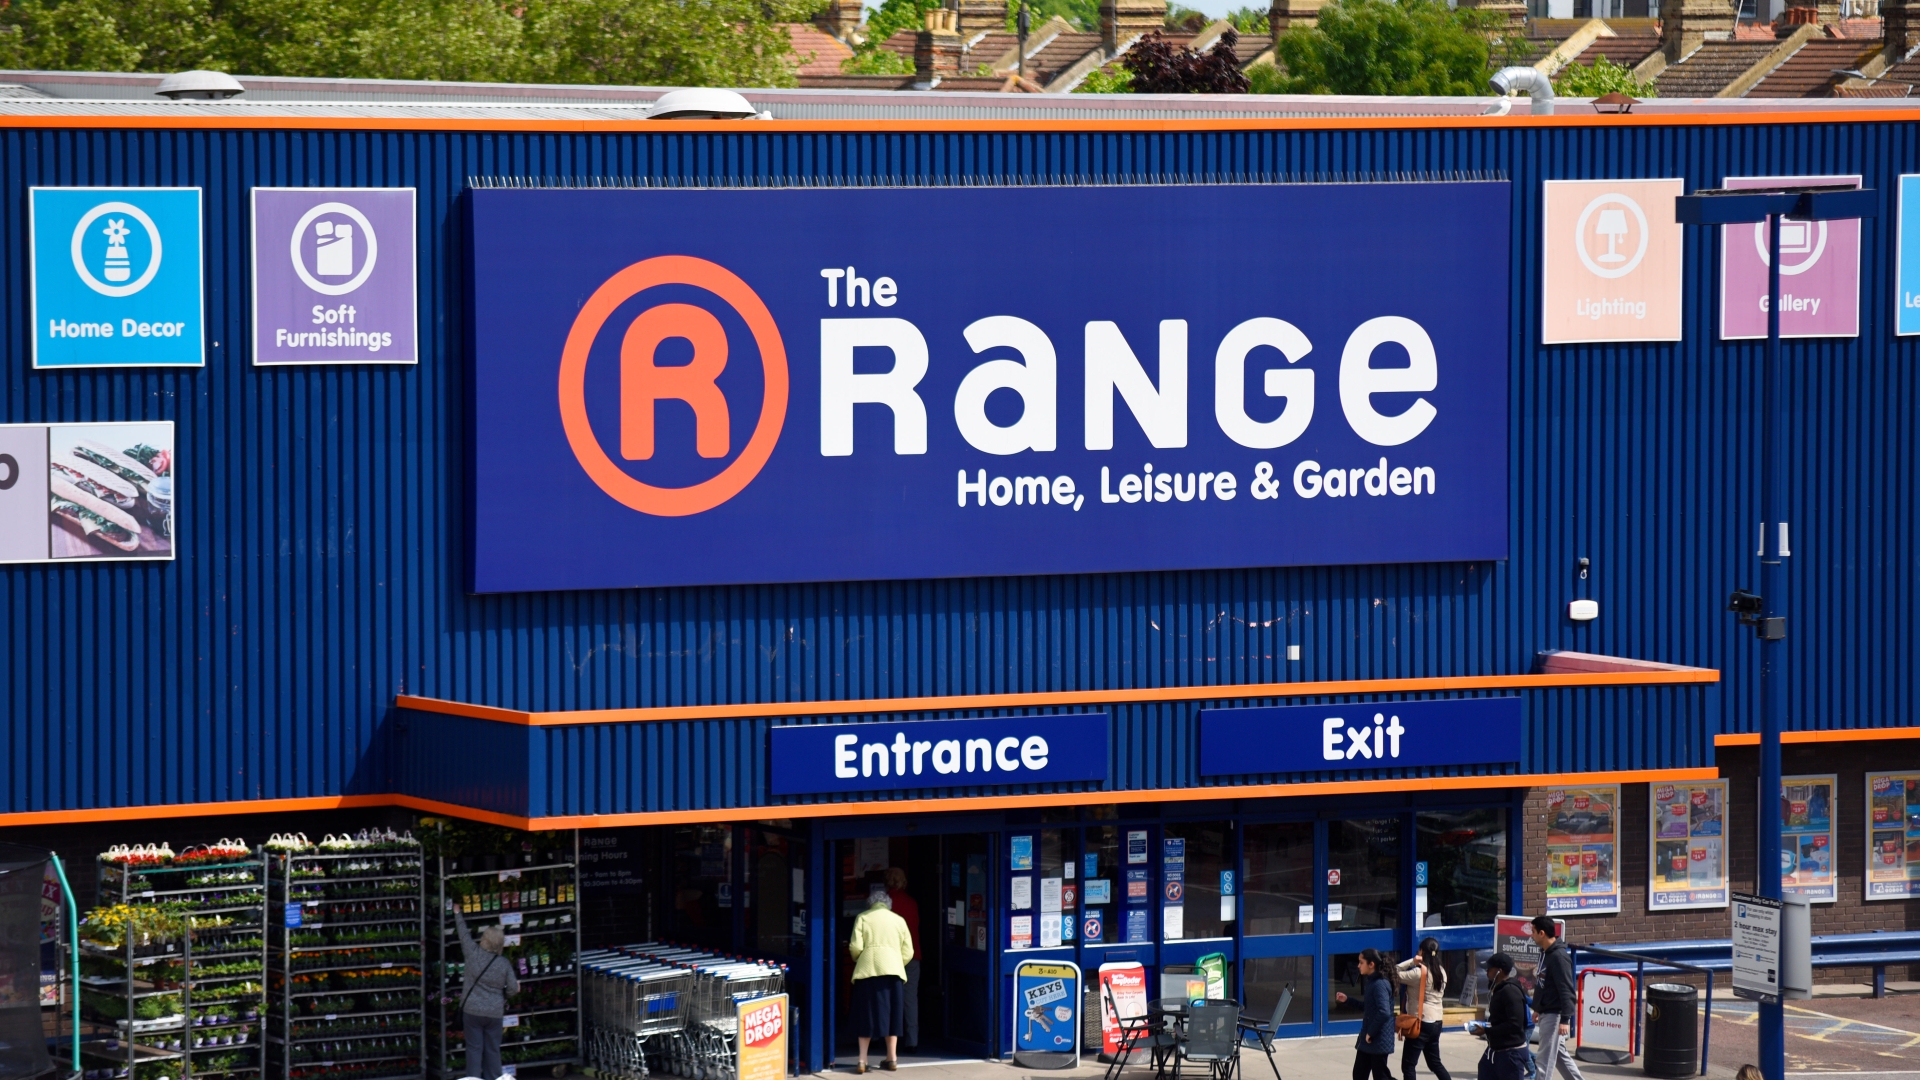 The Range: Your One-Stop Online Shop for Home, Garden, and More!